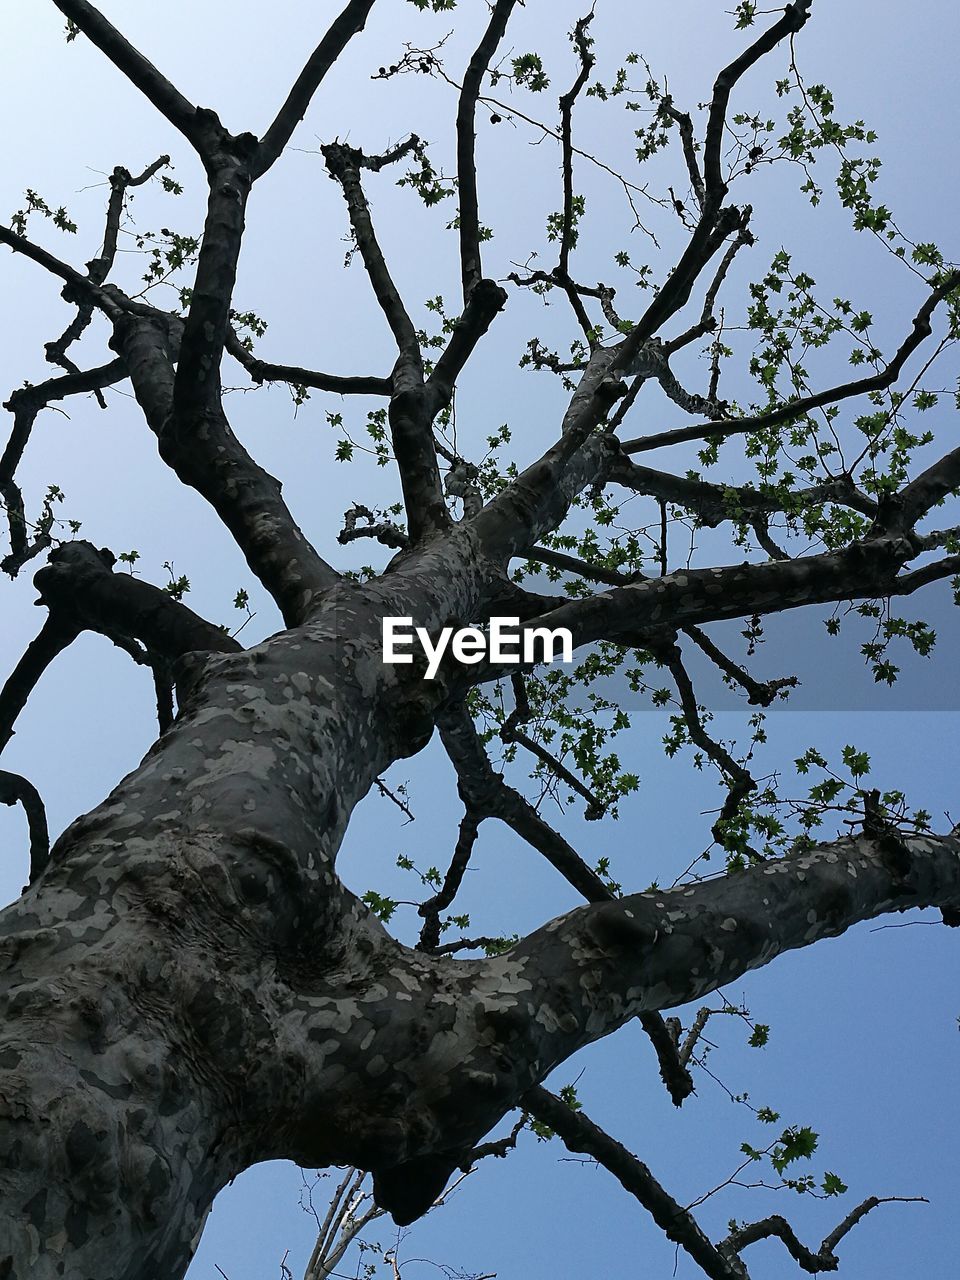 CLOSE-UP OF BRANCH AGAINST SKY